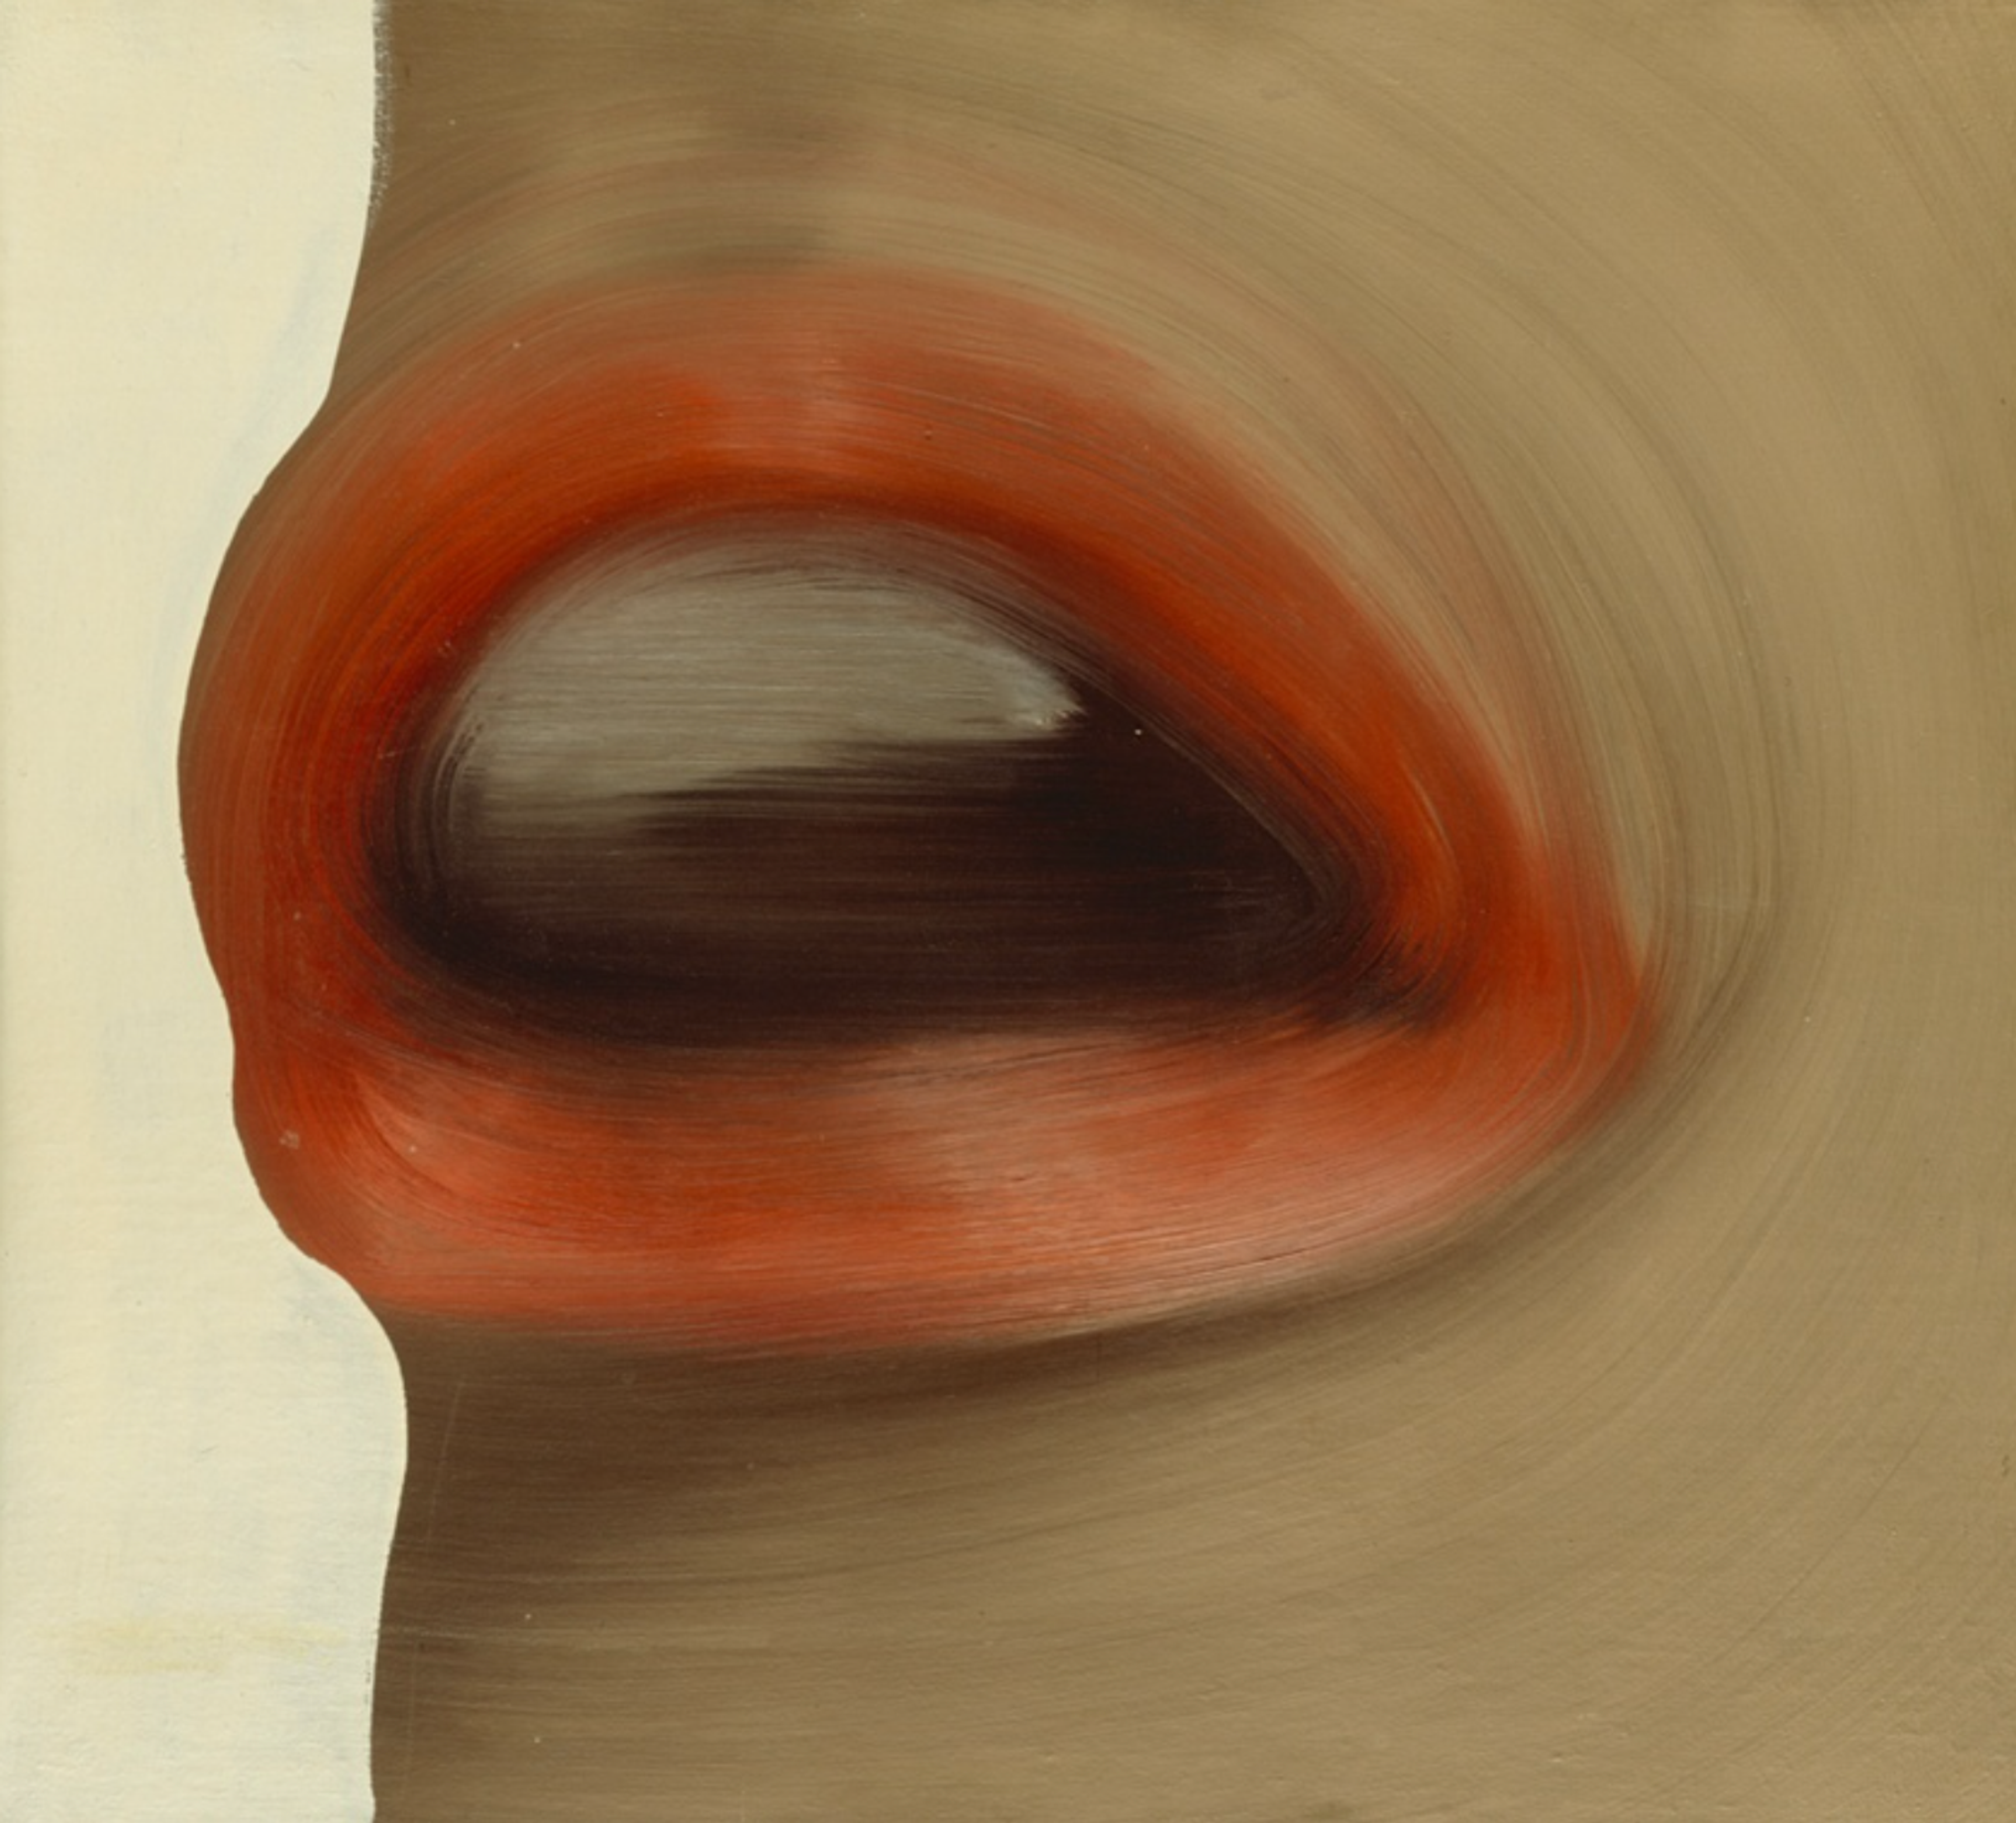 Painting by Gerhard Richter, depicting the mouth of Brigitte Bardot. The actress' mouth is slightly open with an orange-red lipstick on the lips. The artist's brushstrokes are visible and fluid.